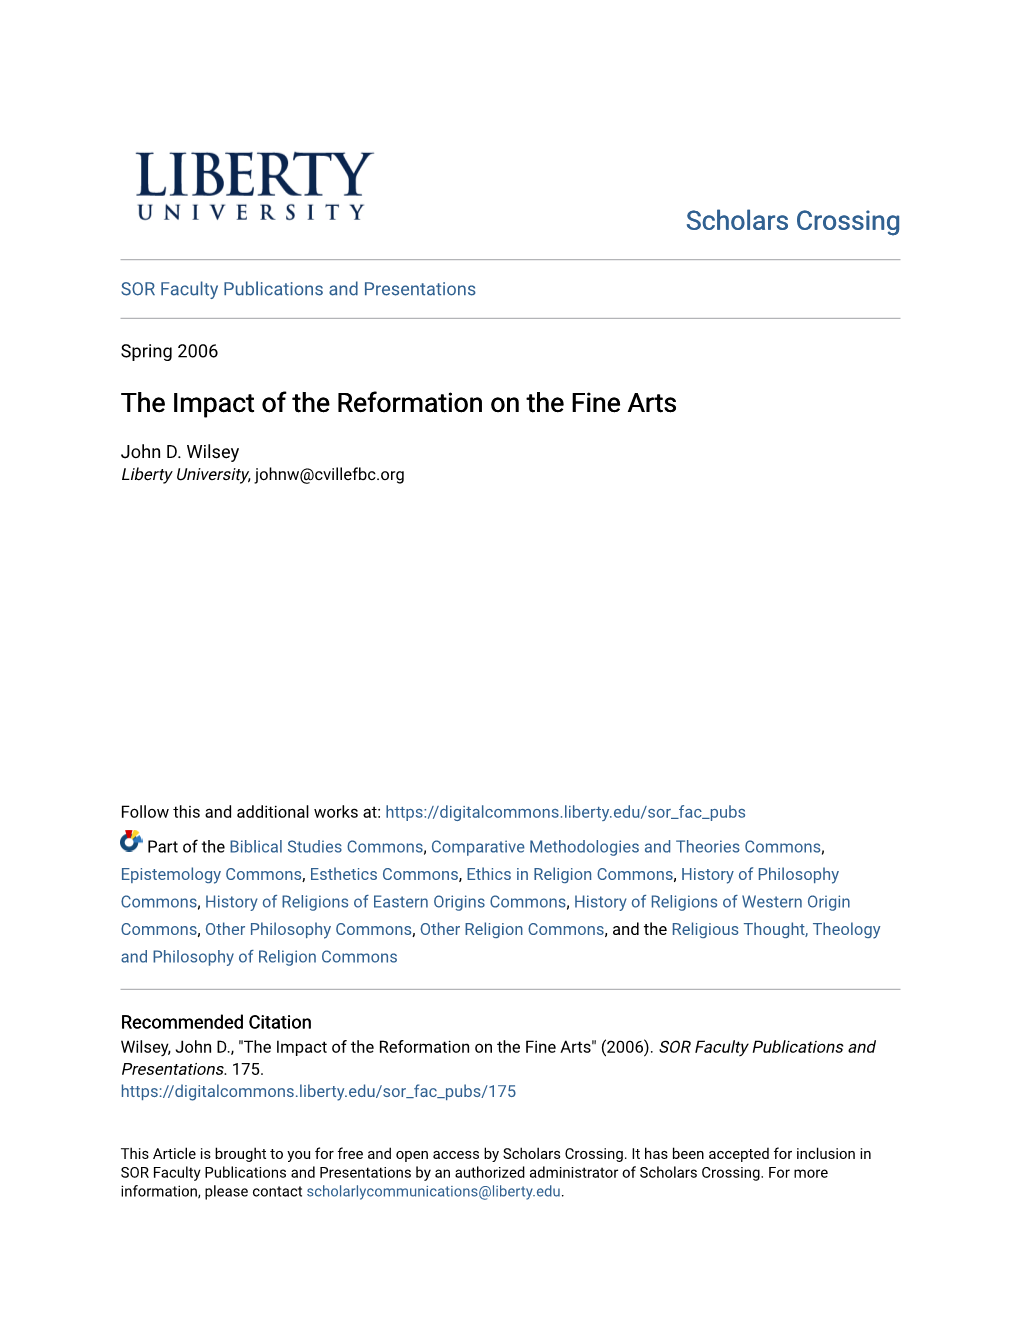 The Impact of the Reformation on the Fine Arts